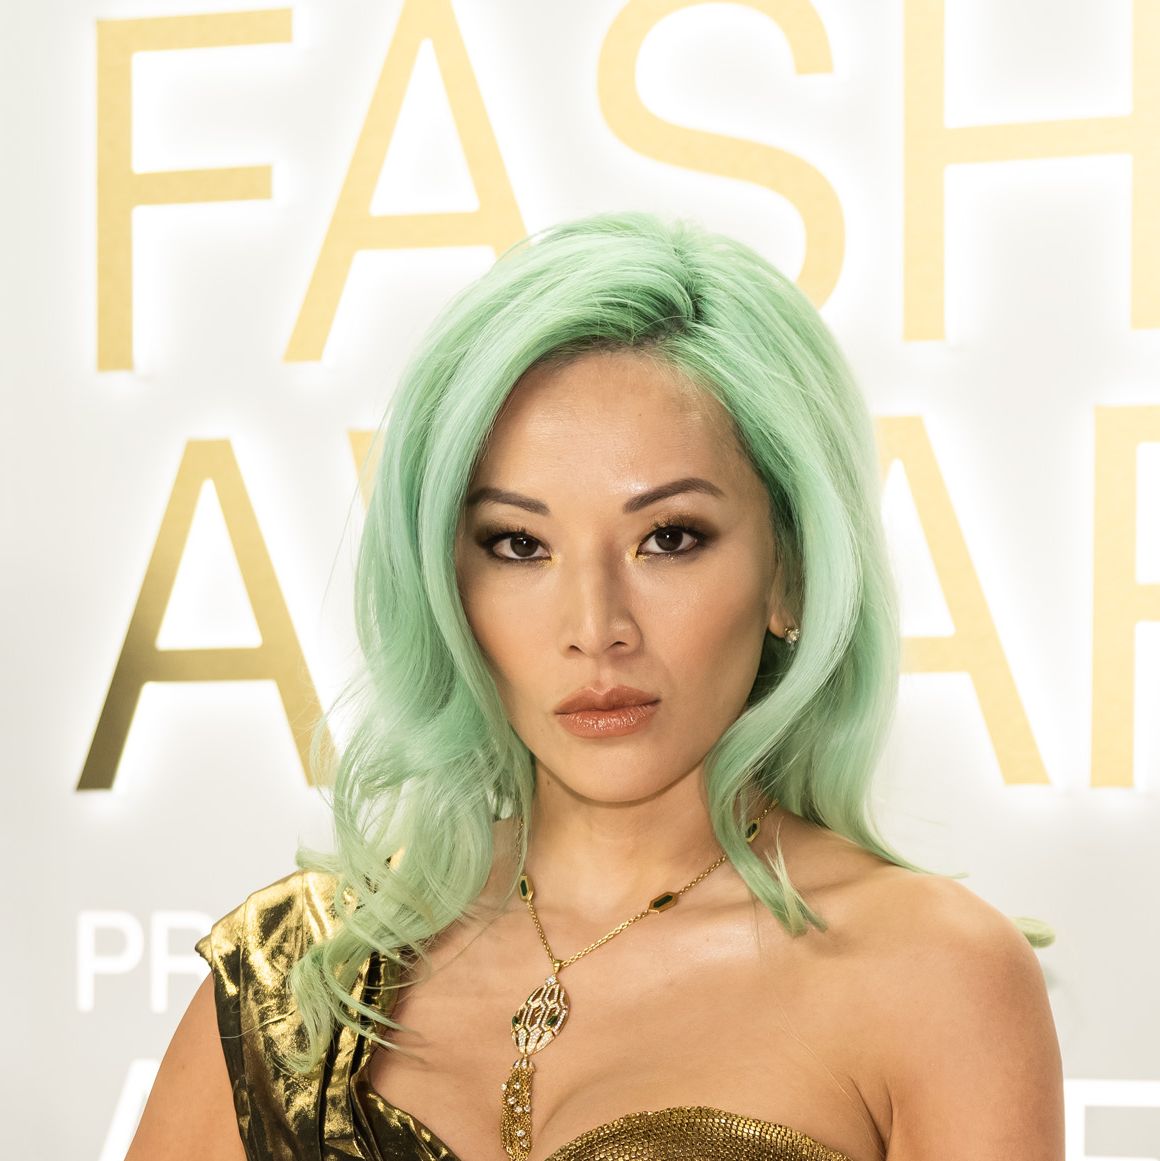 Tina Leung From 'Bling Empire NY': Job, Family, Net Worth, & What To Know